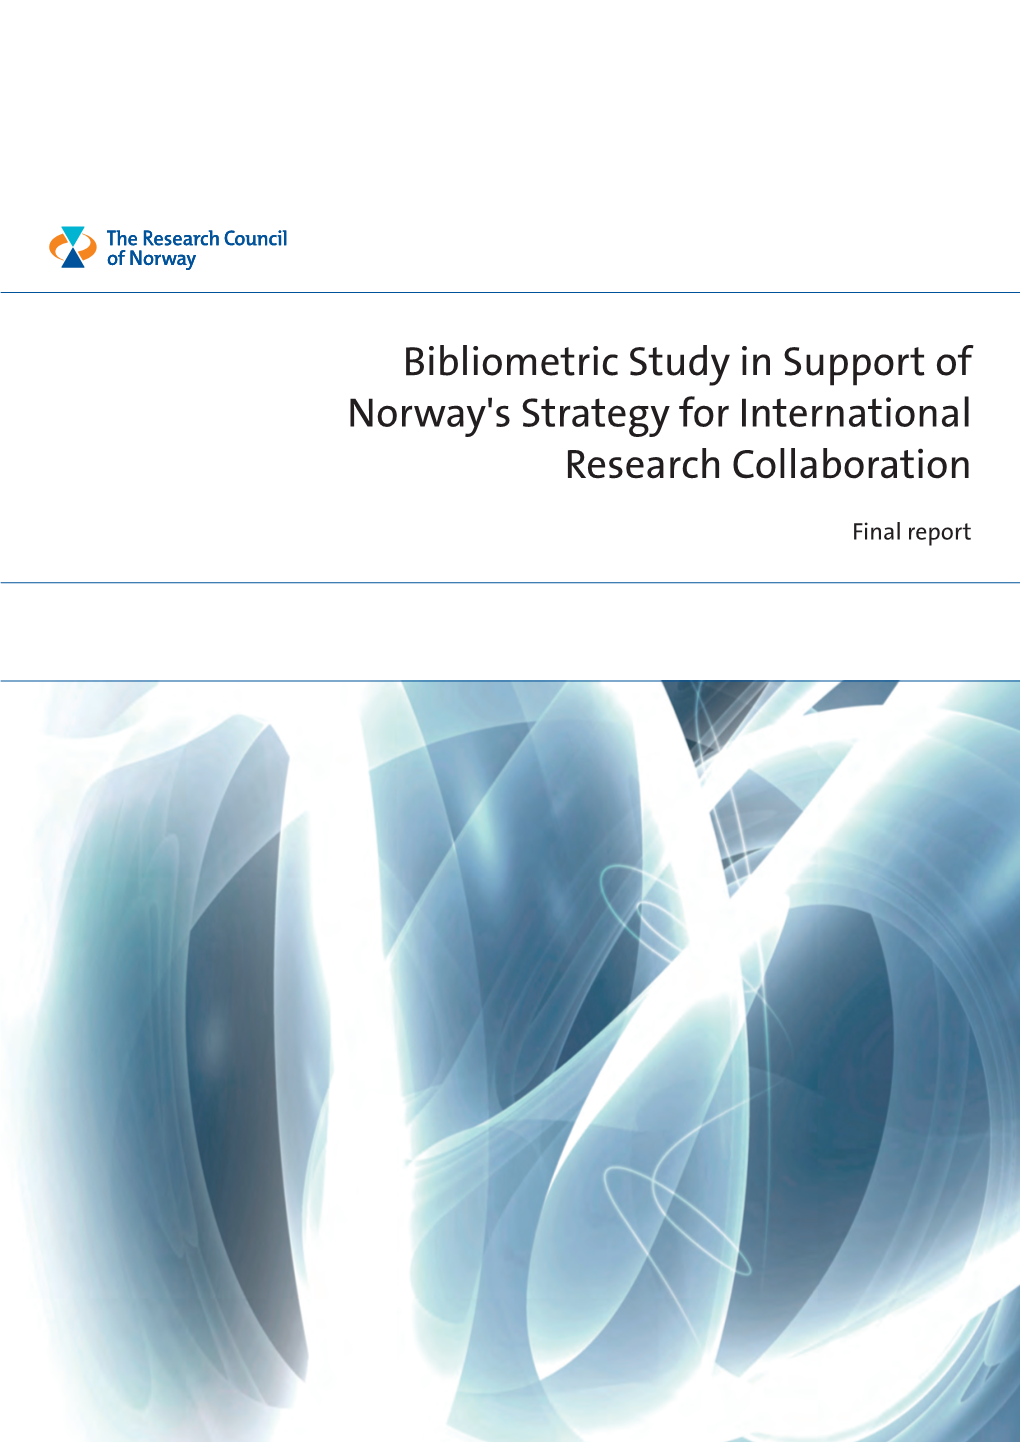 Bibliometric Study in Support of Norway's Strategy for International Research Collaboration